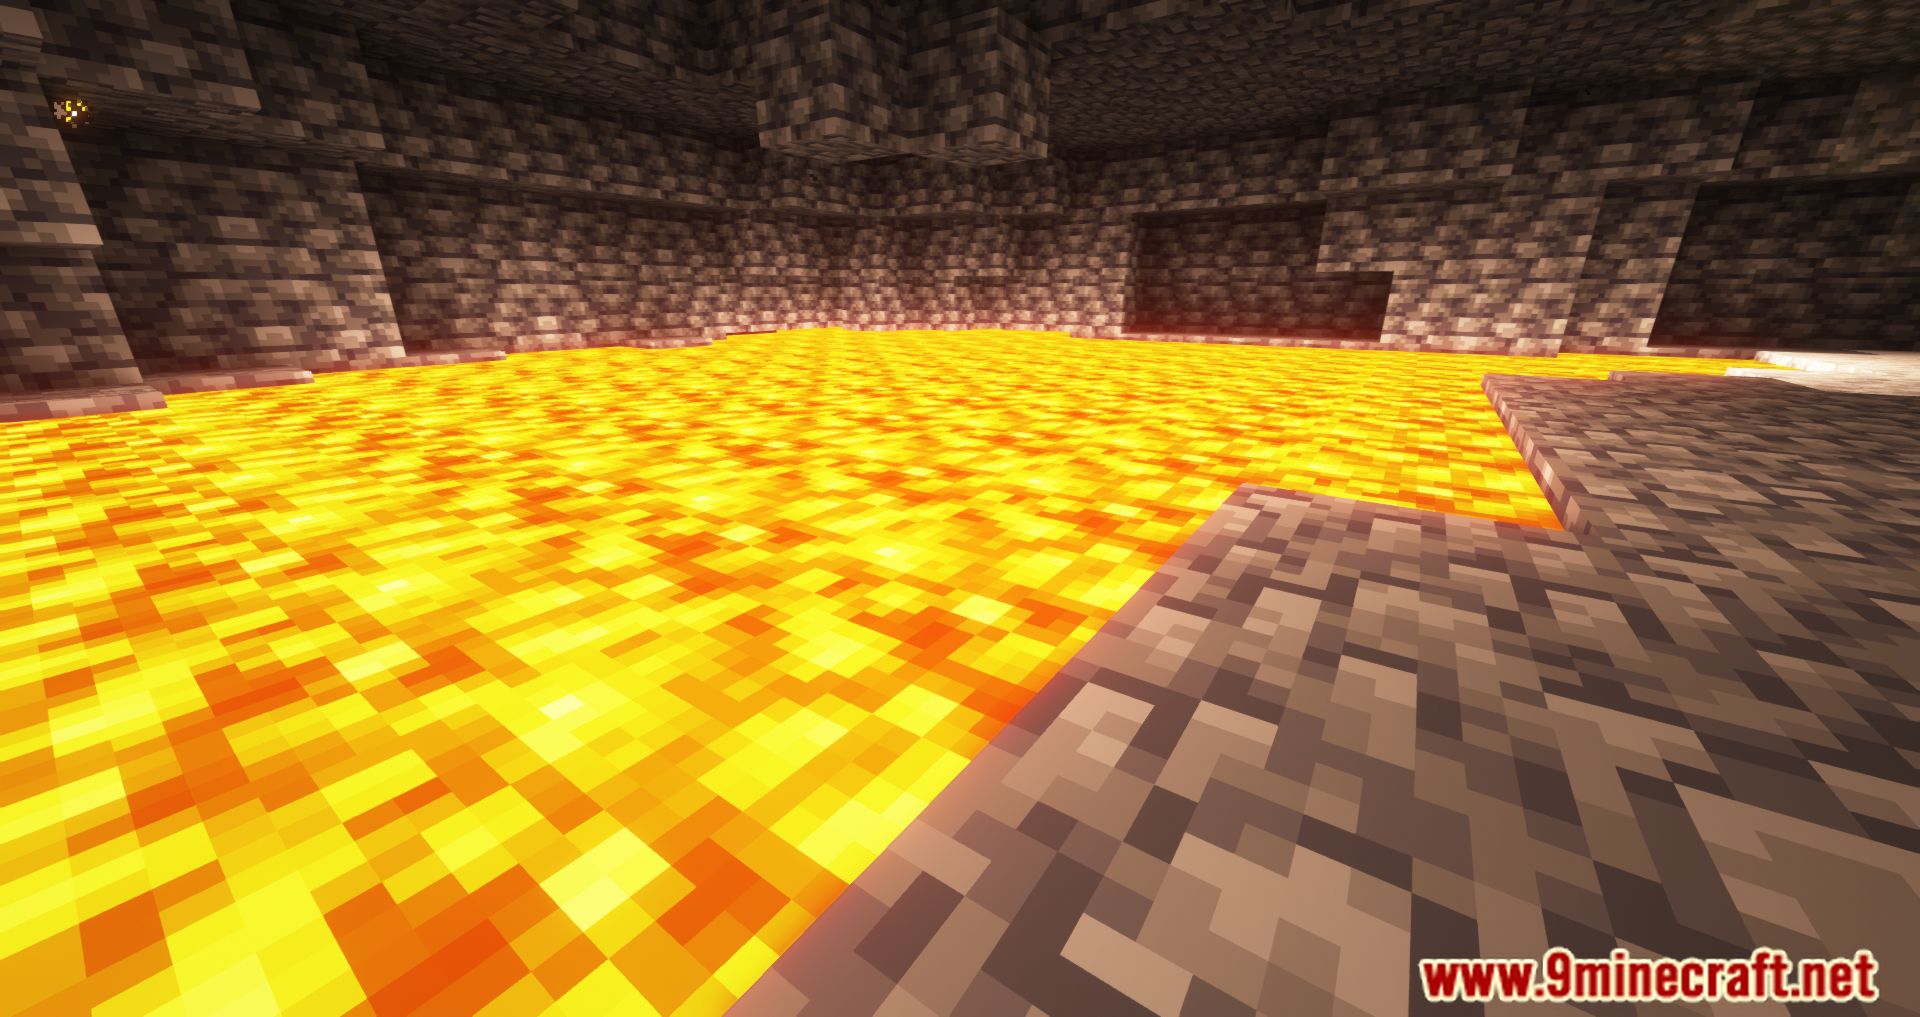 Cannot Build Over Lava Source Blocks Mod (1.20.1, 1.19.4) - More Complex And Challenging 7